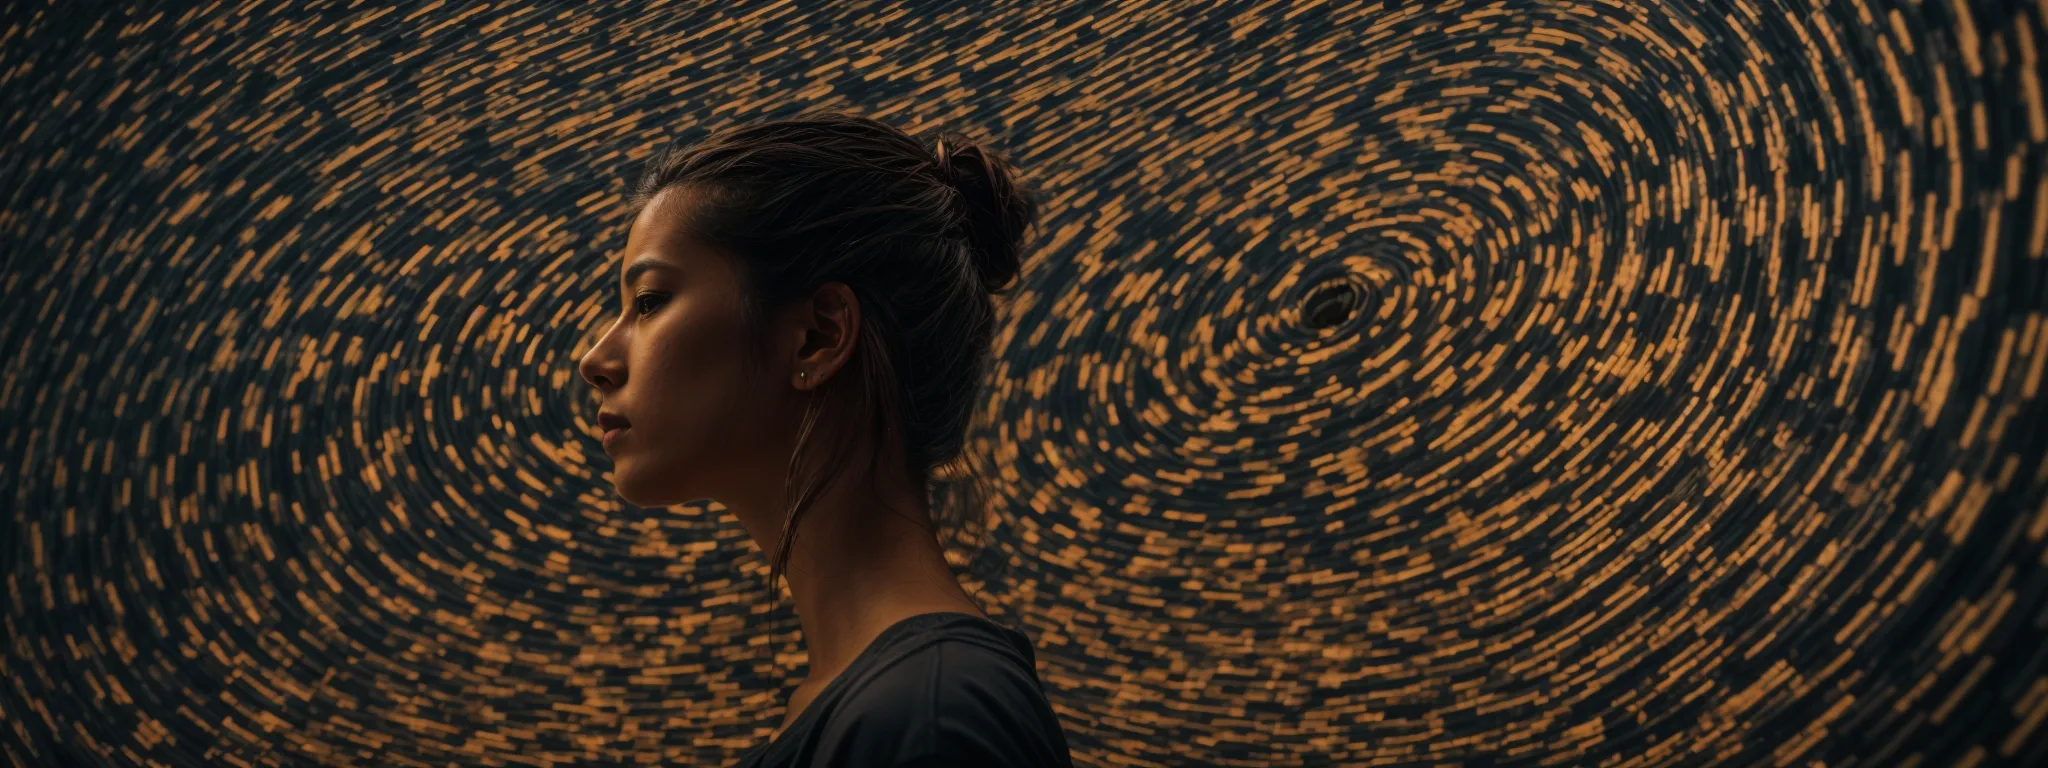 a person staring thoughtfully at a swirling pattern representing the complexity of search query types.